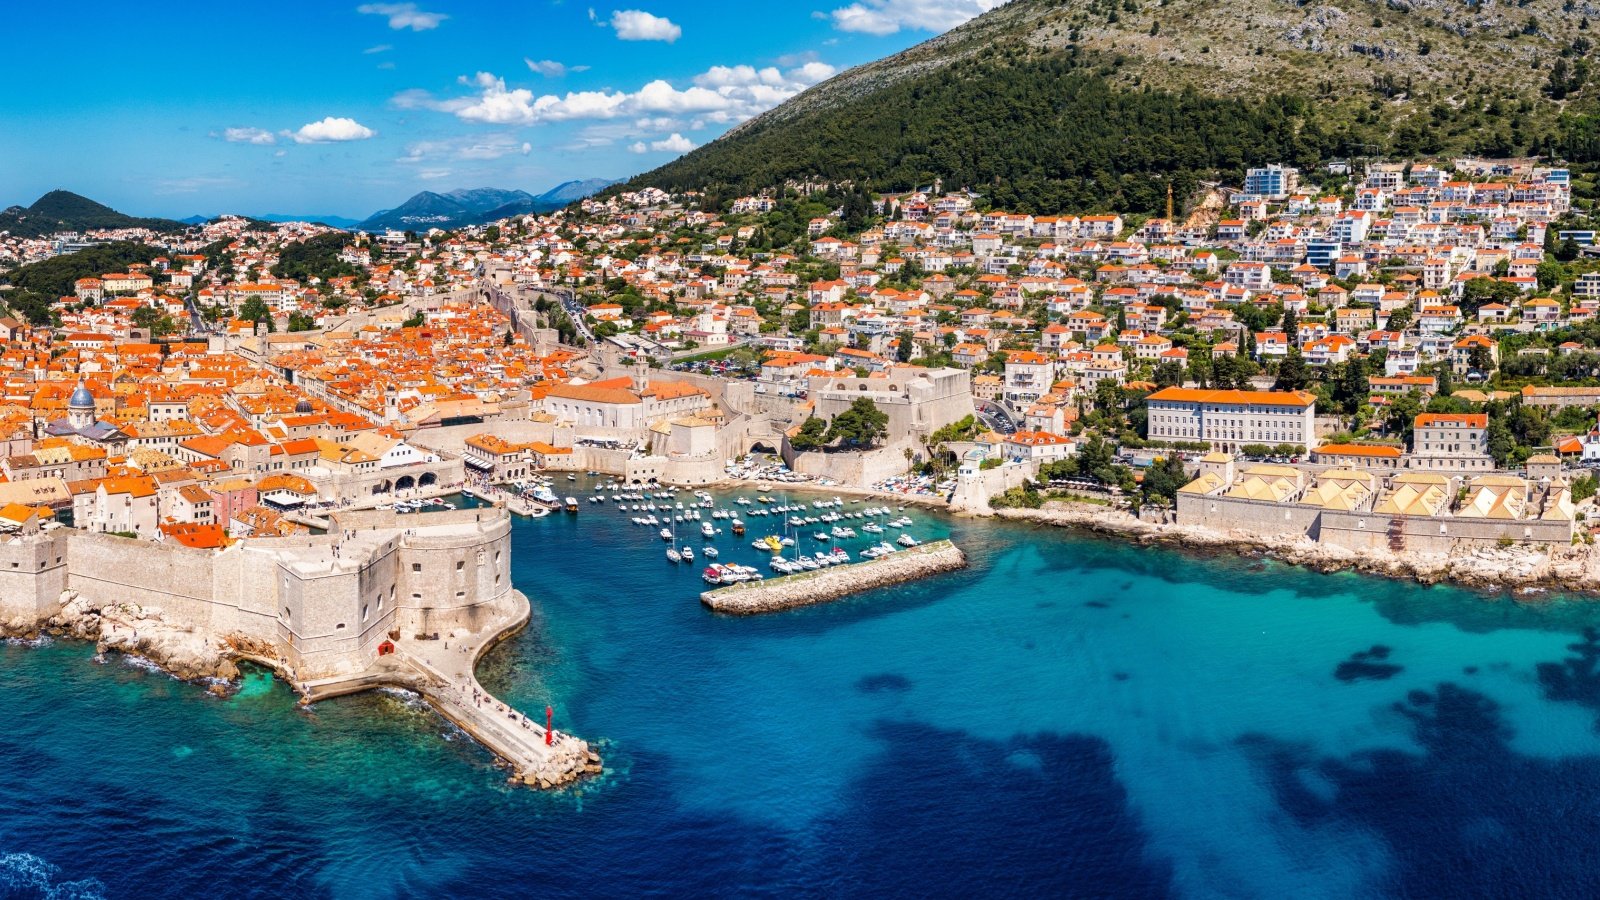 <p>This seaside town in Croatia was recently named the most overcrowded tourist location in Europe. It’s incredibly crowded. The overwhelming amount of tourists has caused significant traffic problems and increased prices.</p>